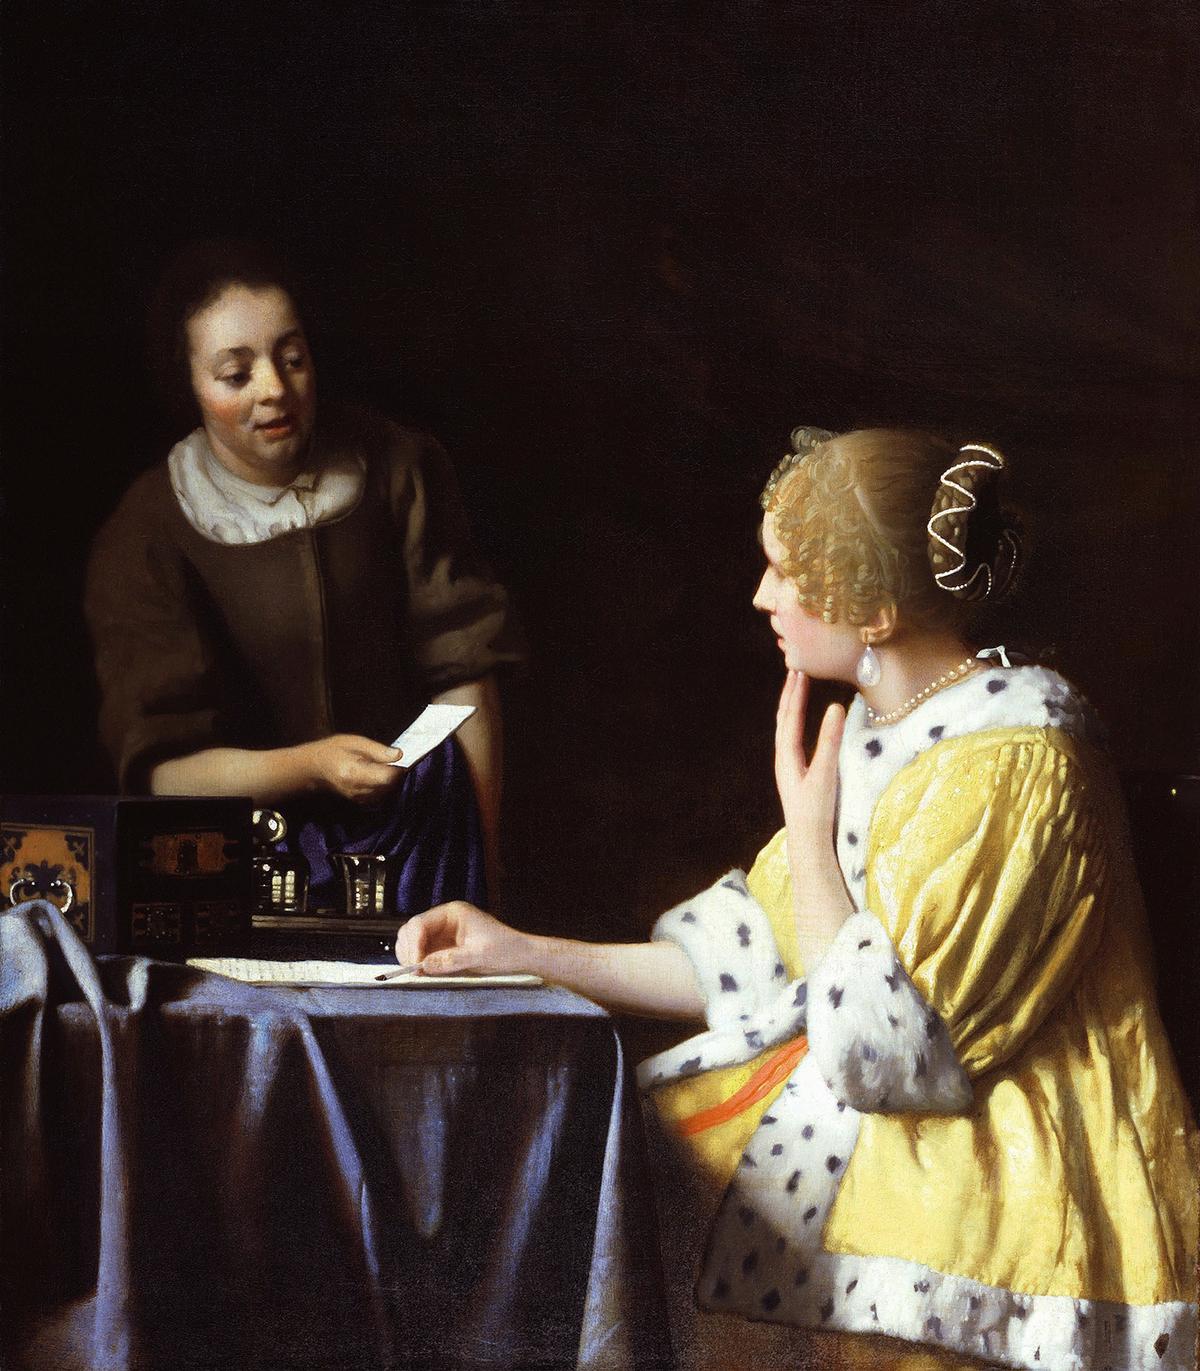 "Mistress and Maid," circa 1666–1667, by Johannes Vermeer. Oil on canvas. The Frick Collection, New York. (Public Domain)